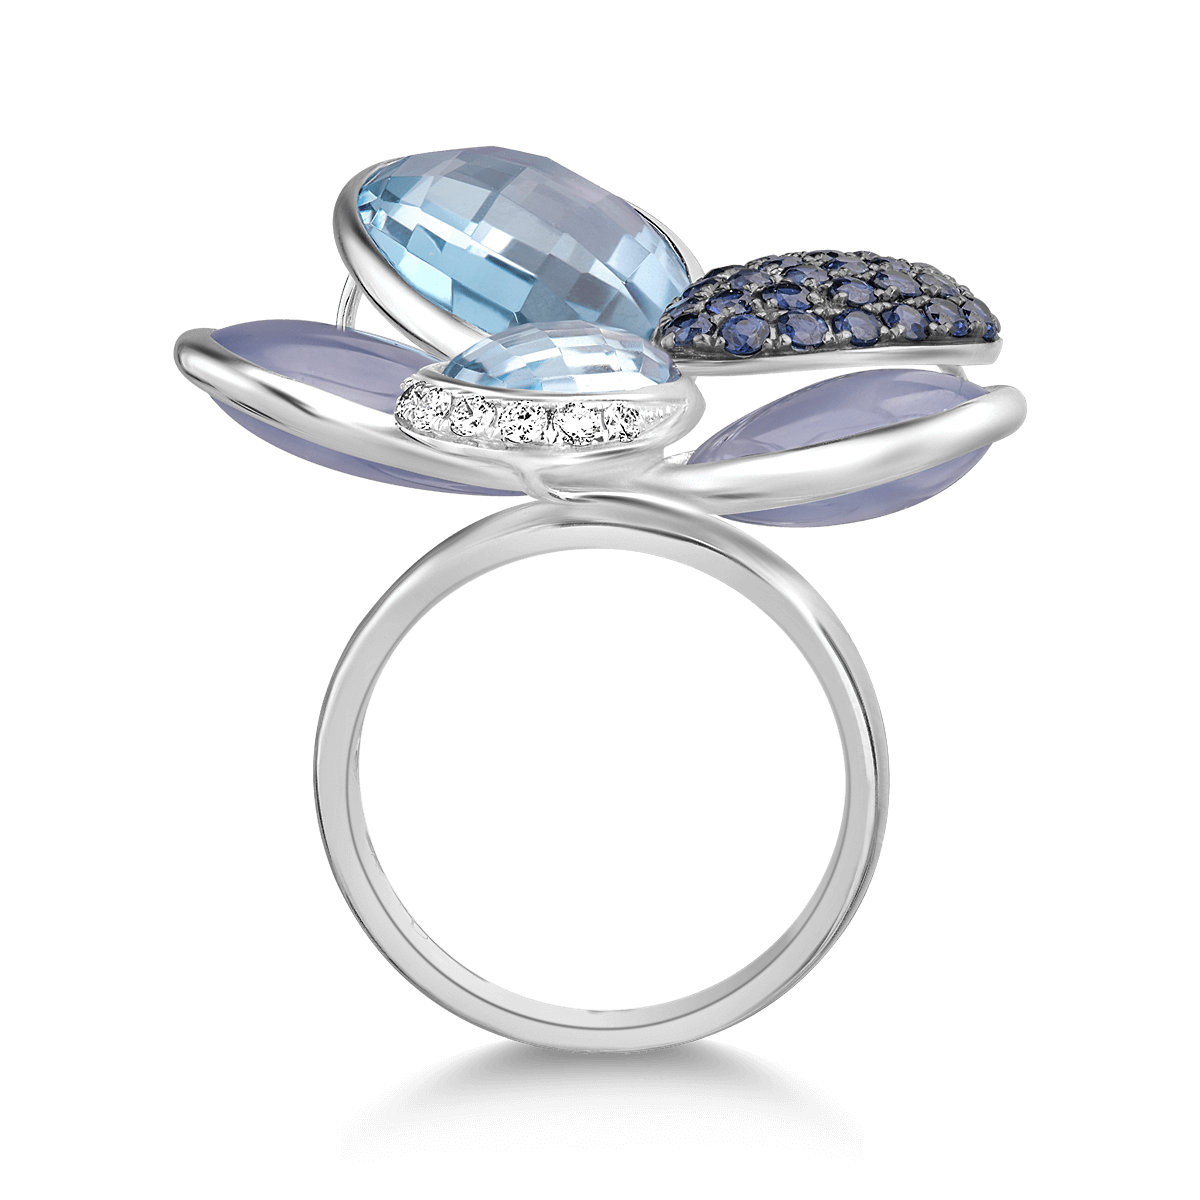 18K white gold ring with 25.25ct precious and semiprecious stones